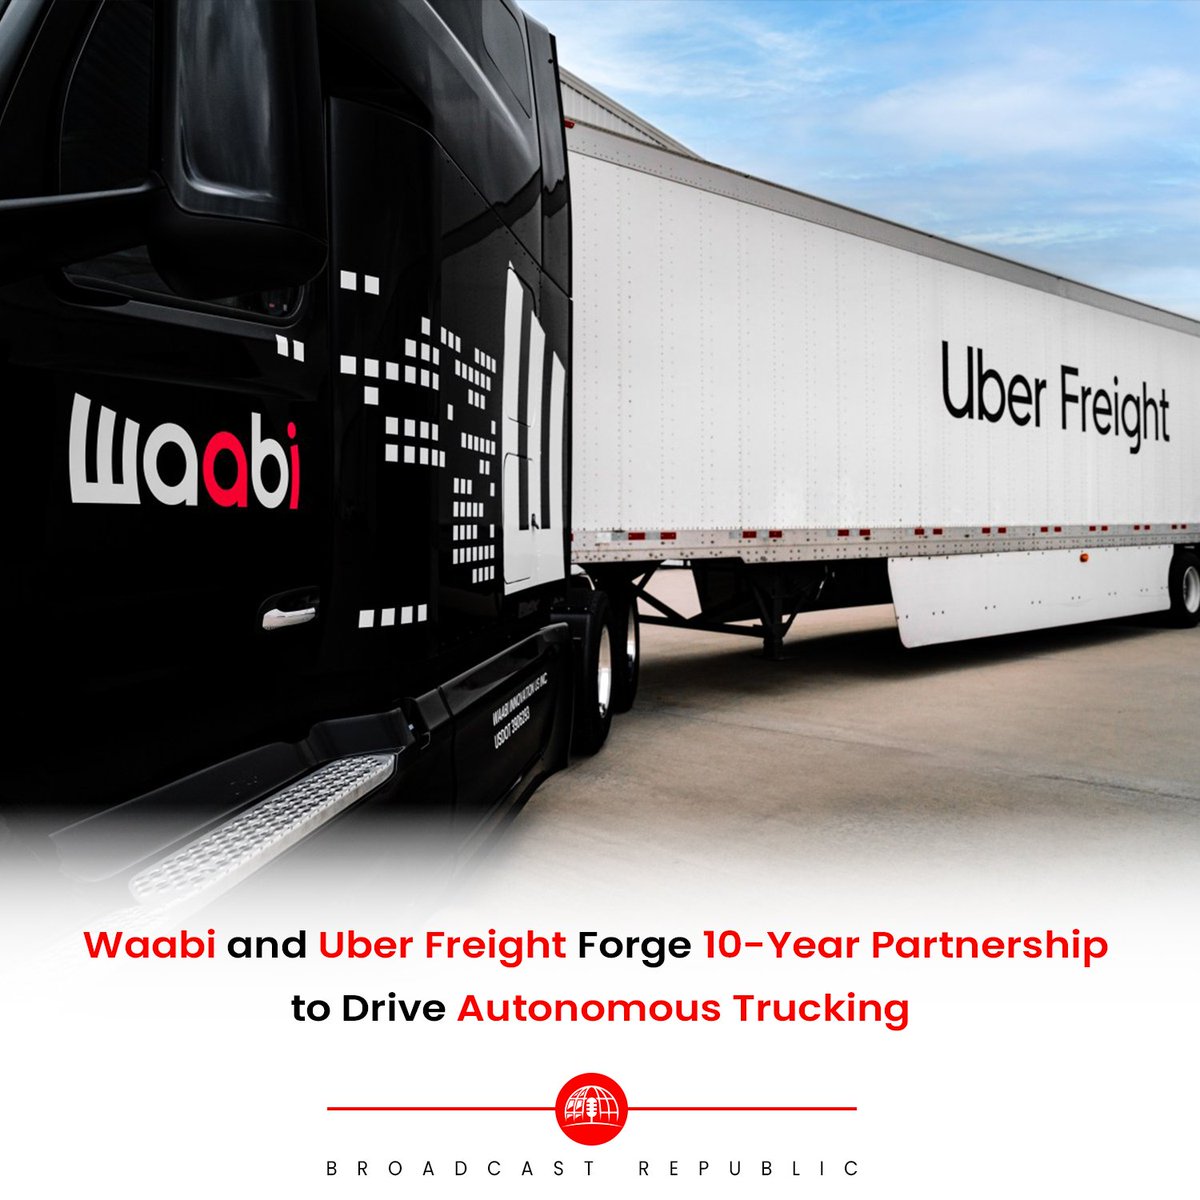 Autonomous trucking startup Waabi and Uber Freight have entered into a strategic 10-year partnership, committing billions of miles of driverless capacity to the Uber Freight network.

#BroadcastRepublic #Waabi #UberFreight #AutonomousTrucking